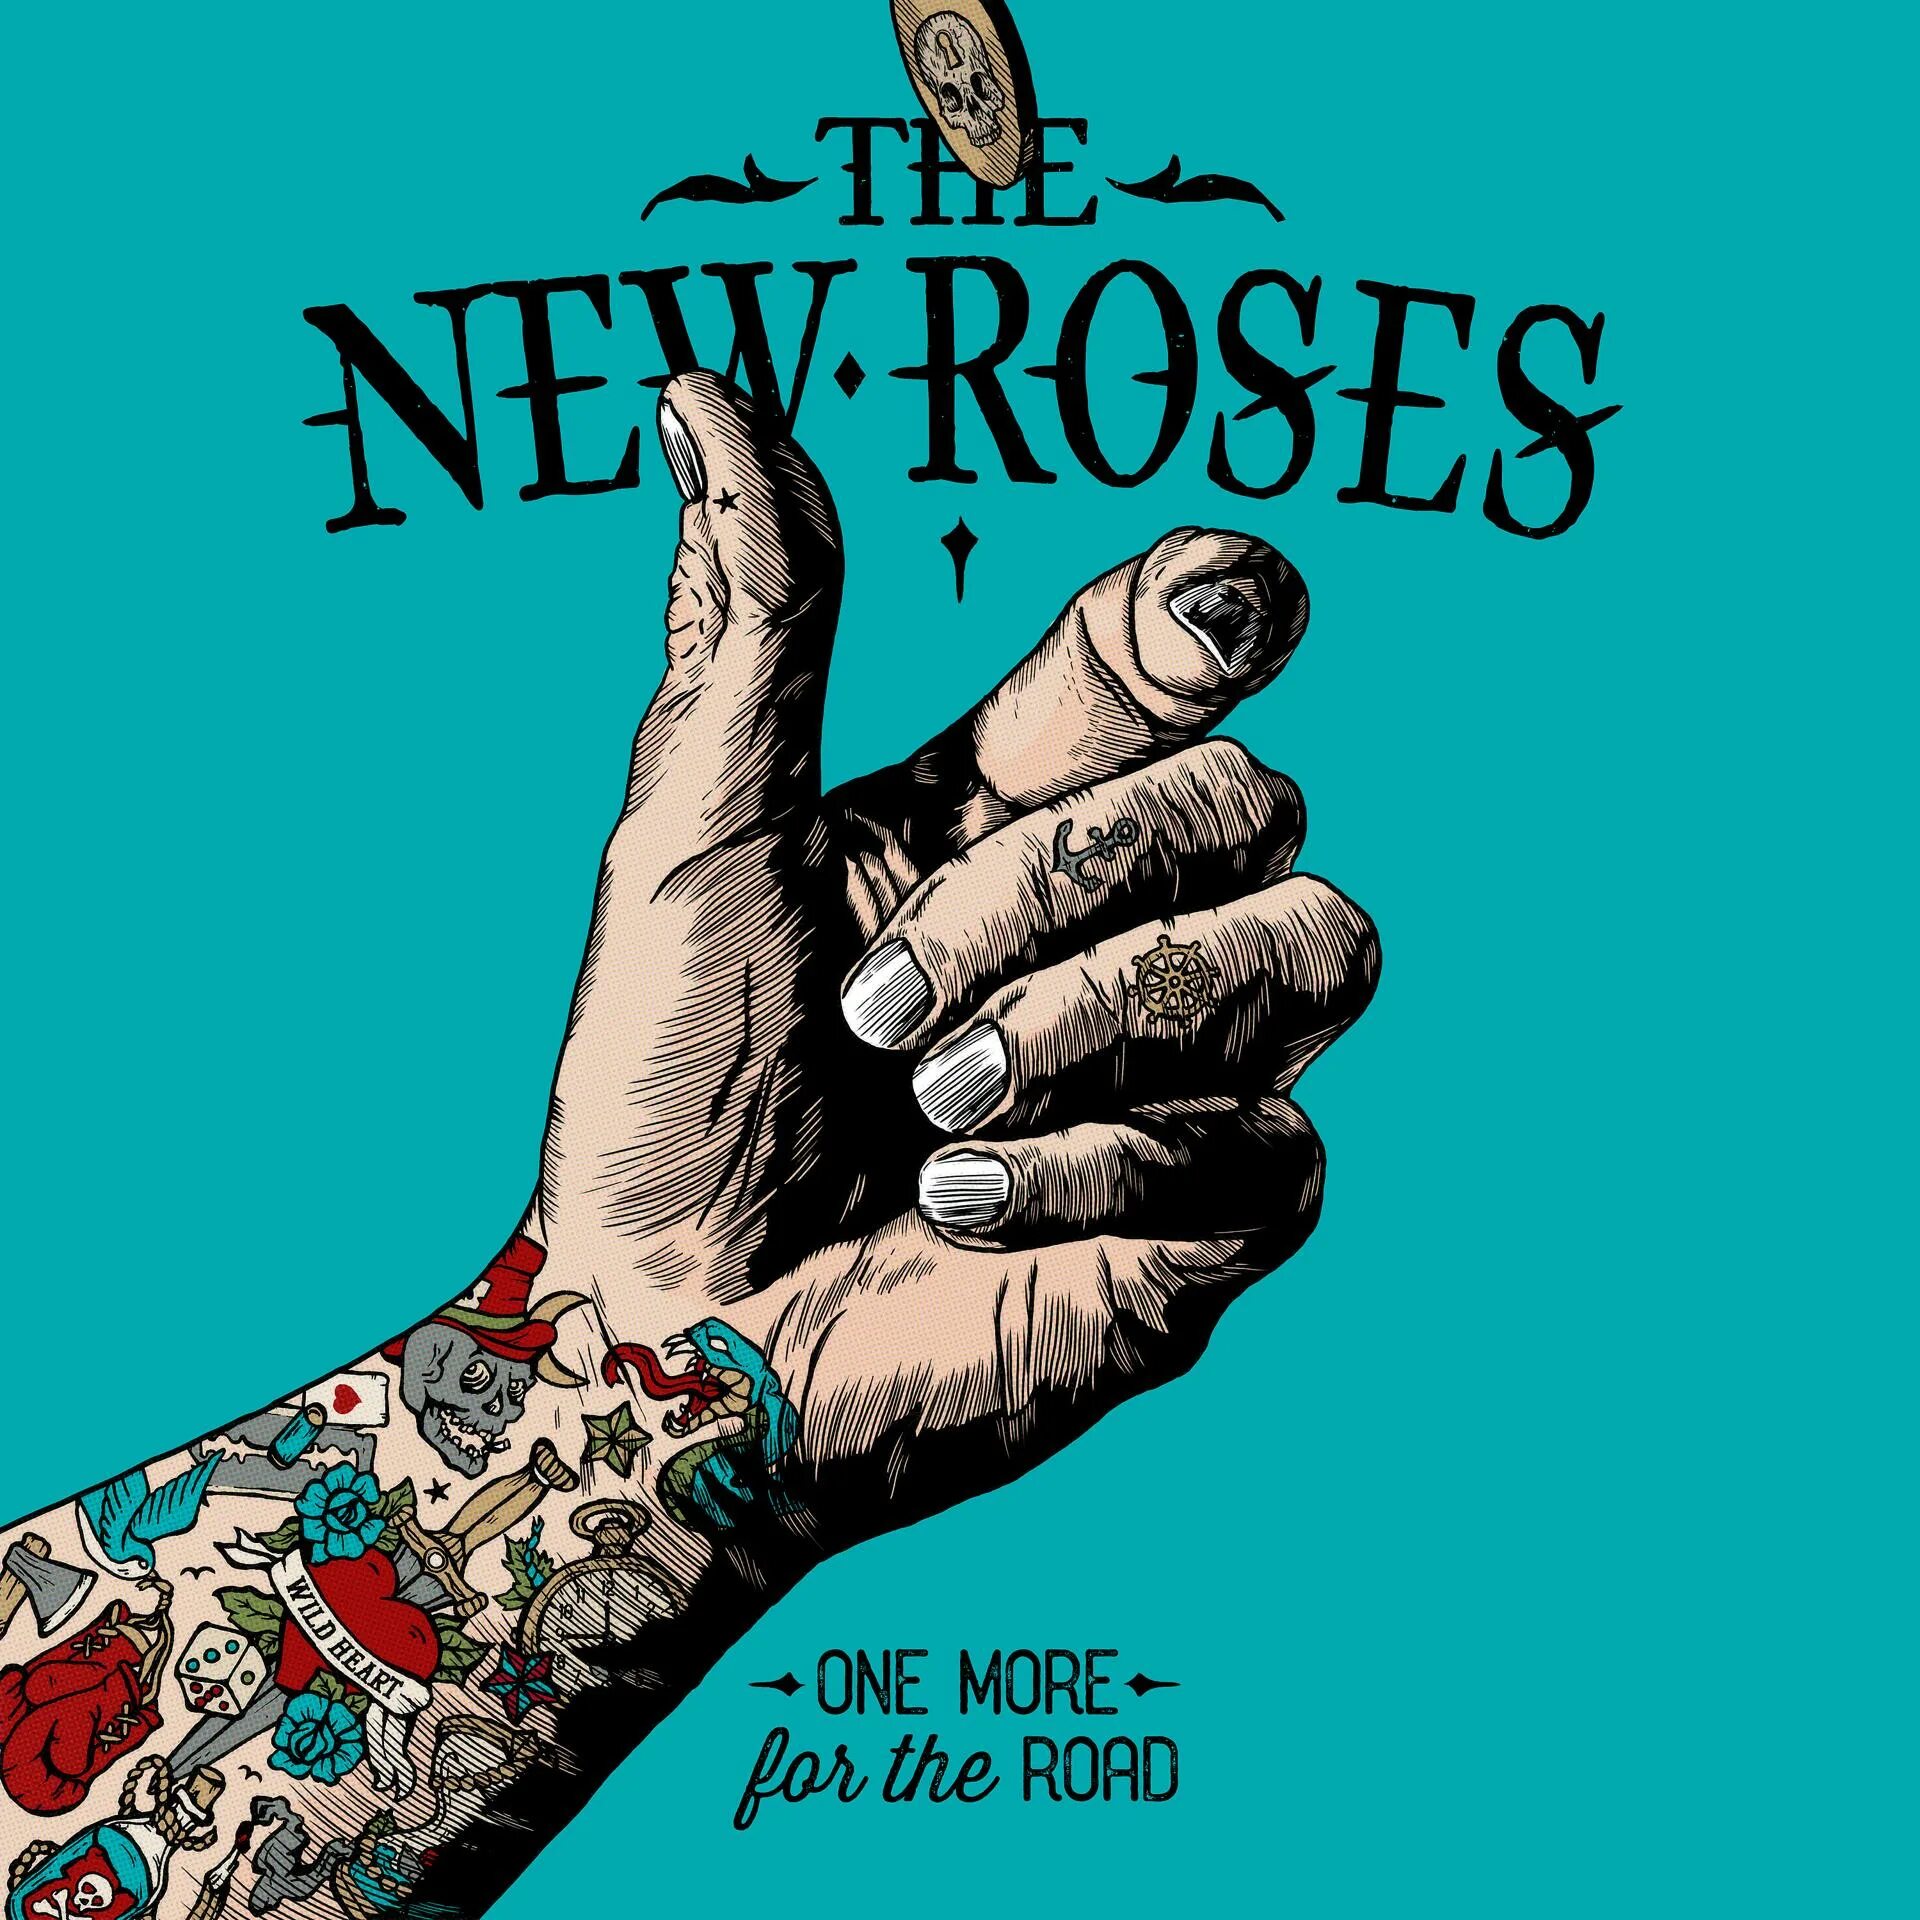 The New Roses Dead man's Voice. One for the Road. The New Roses - one more for the Road (2017)(FLAC)(CD).